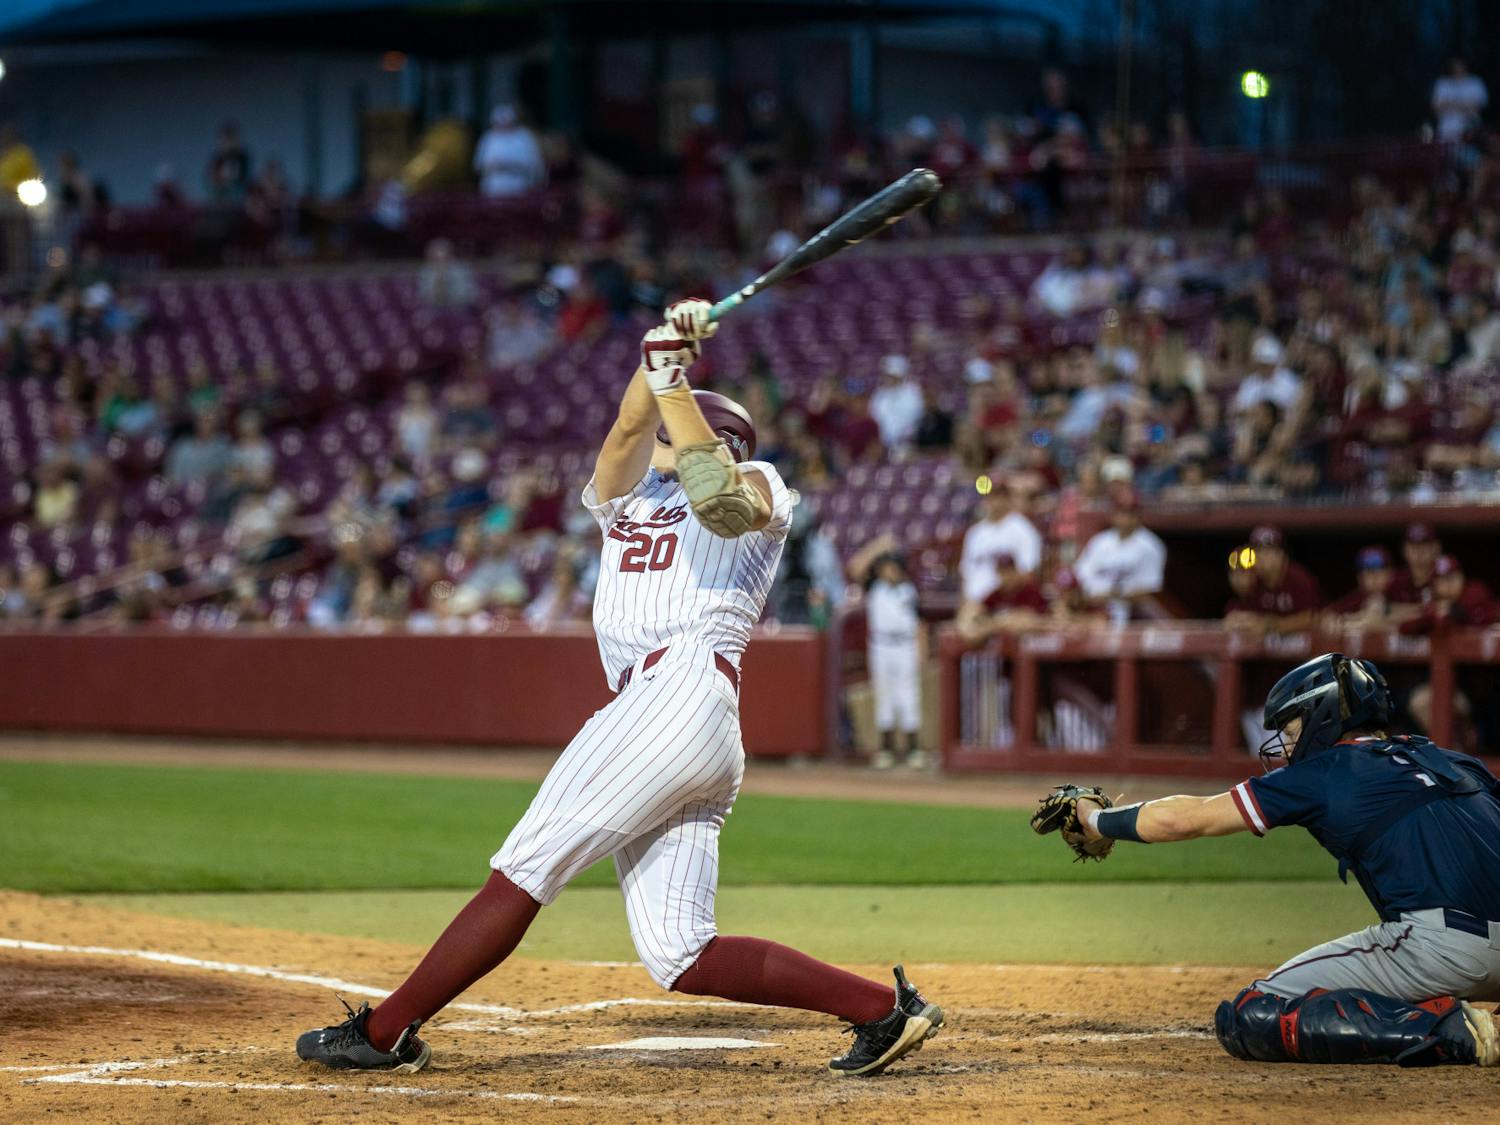 Attempting to hit the ball, freshman infielder and pitcher Ethan Petry makes a full swing during the South Carolina matchup against UPenn on Feb. 24, 2023, at Founders Park. South Carolina had won both games so far in its three-game series, with the first score being 7-4 and the other 1-0.